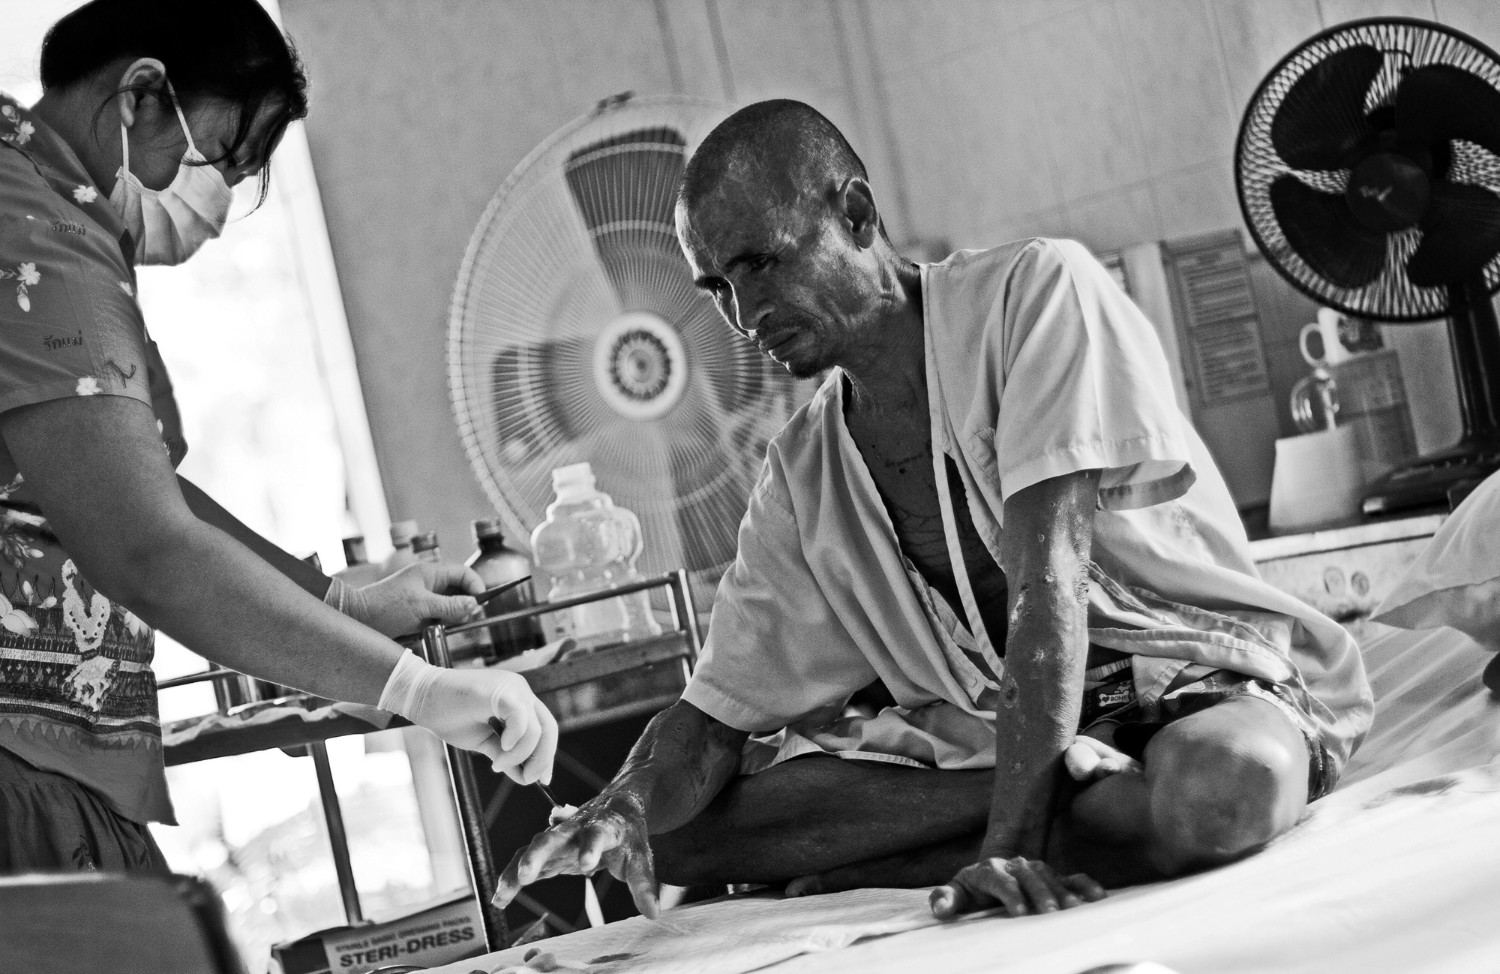 An hiv patient getting treatment in a temple in Lop Buri Thailand